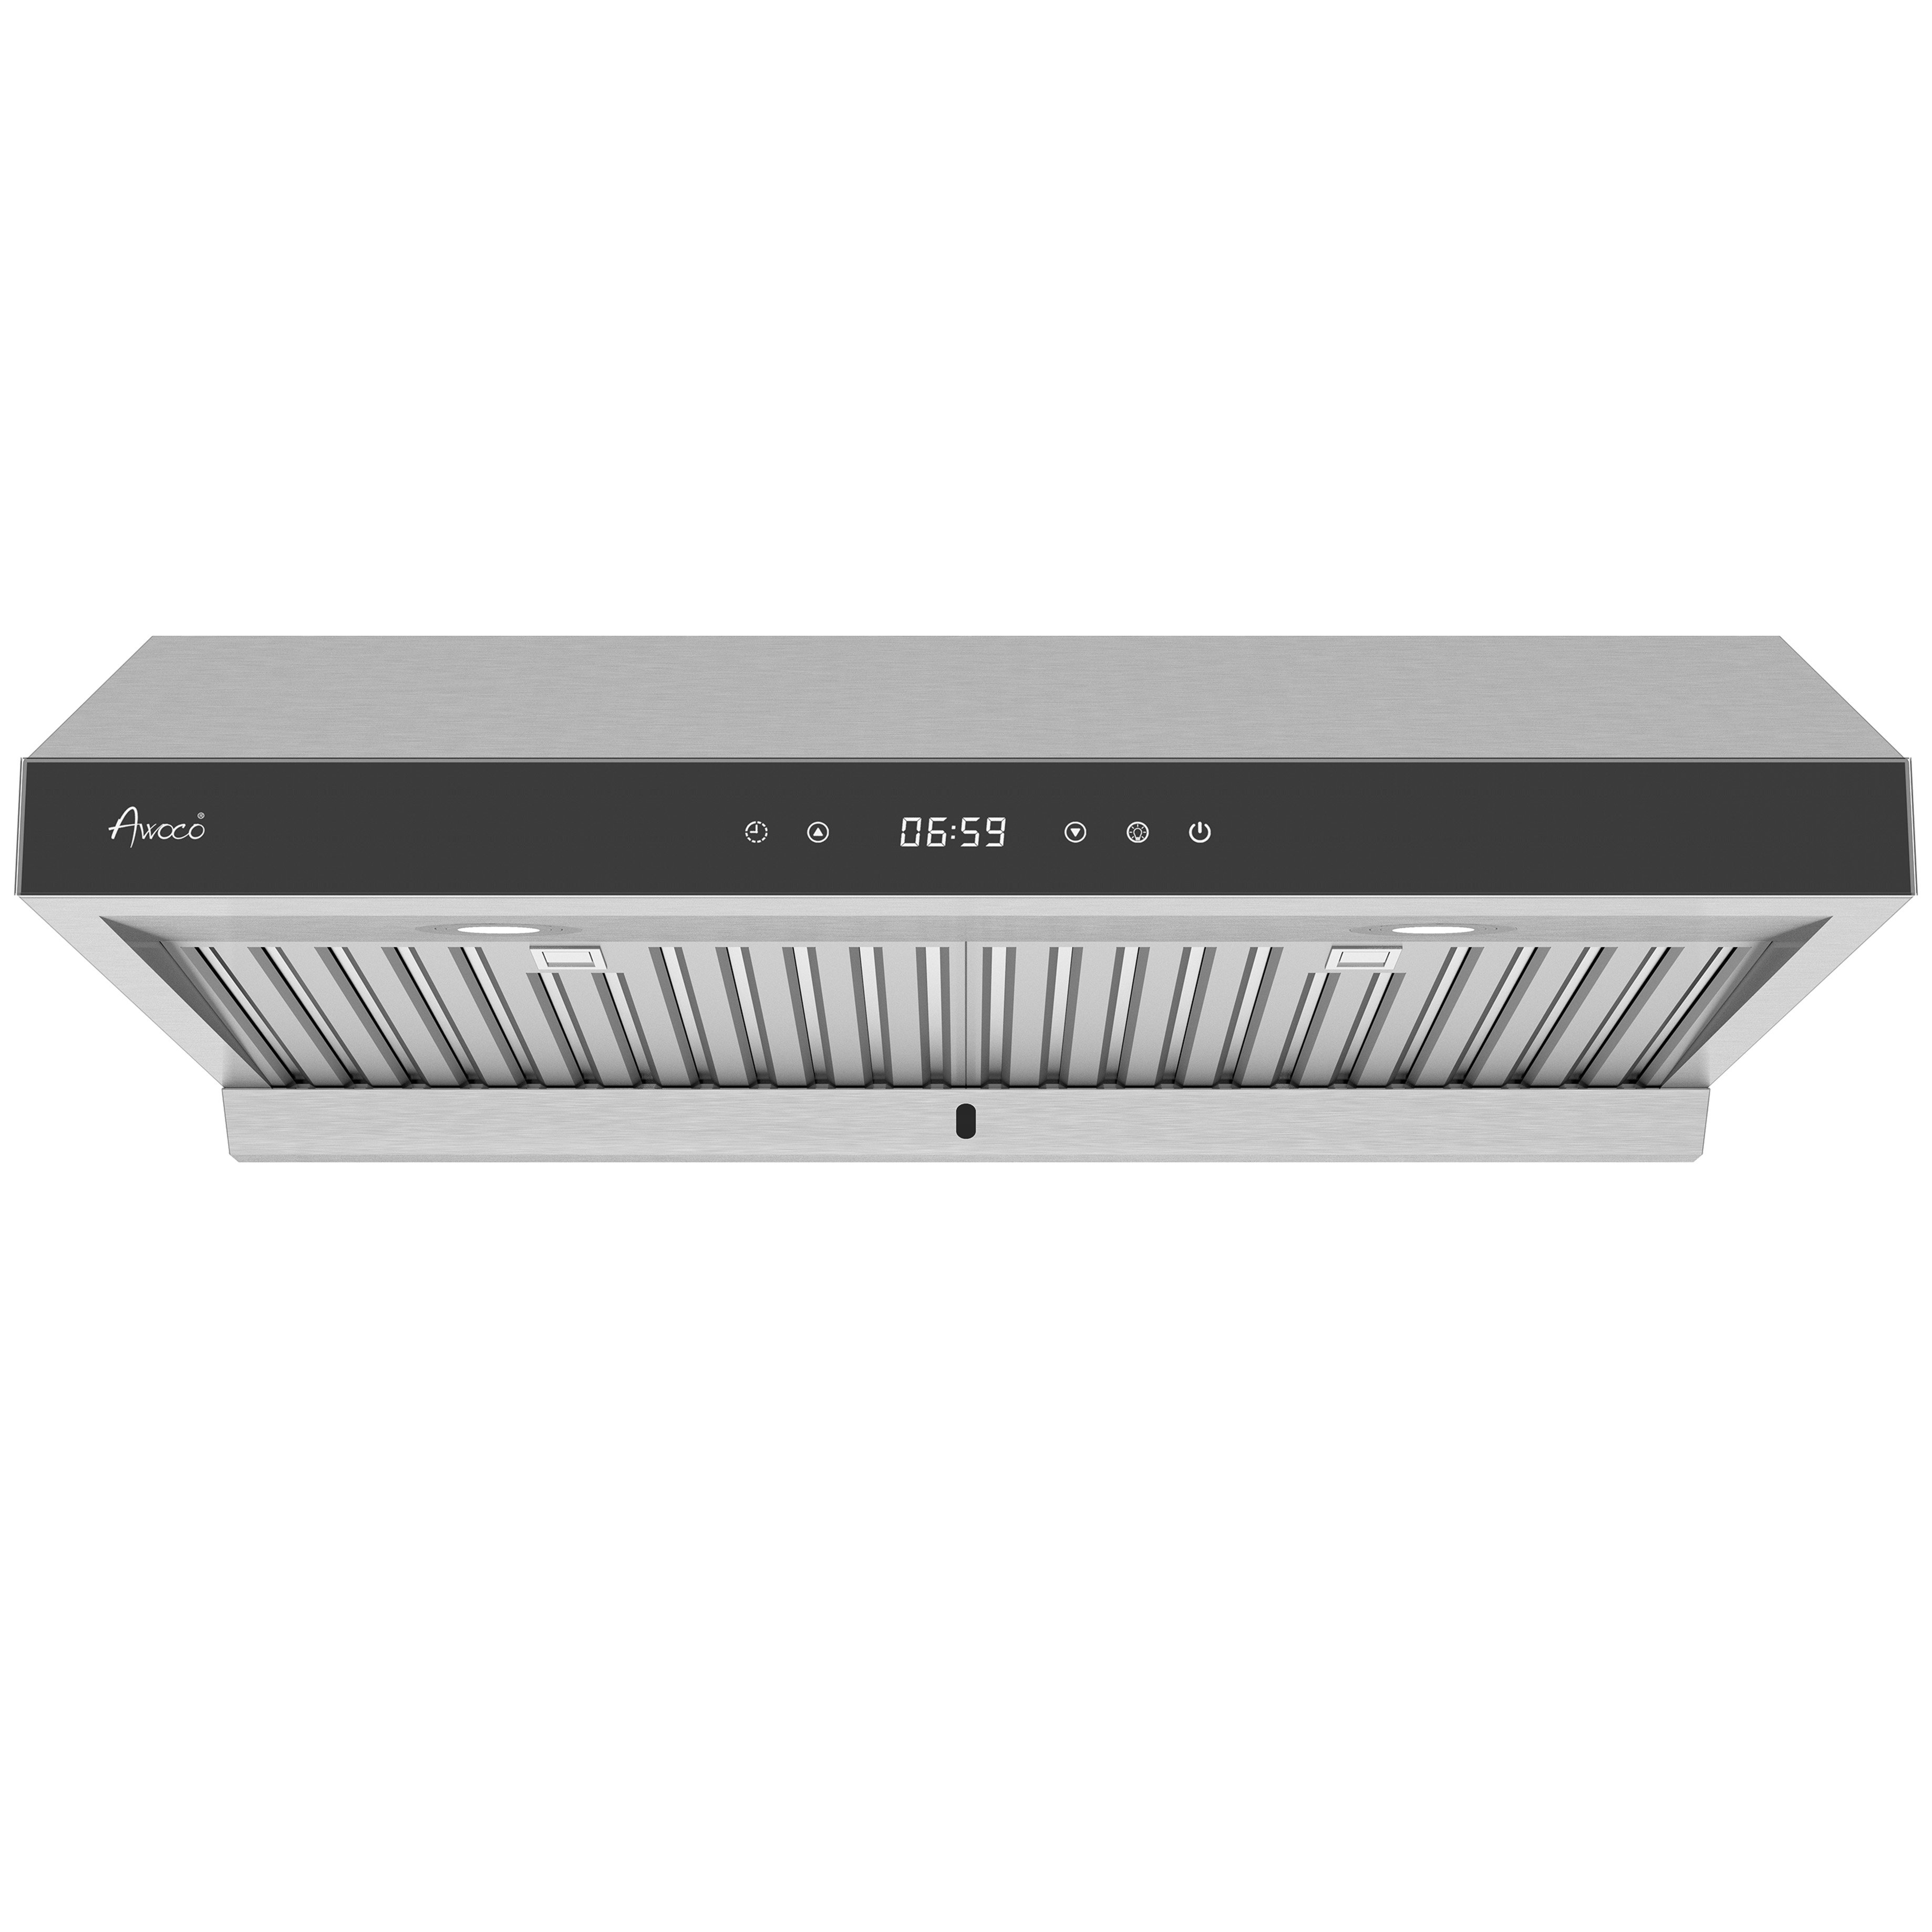 Awoco 36 Inches 900 Cubic Feet Per Minute Cfm Ducted Under Cabinet Range Hood In Blackstainless